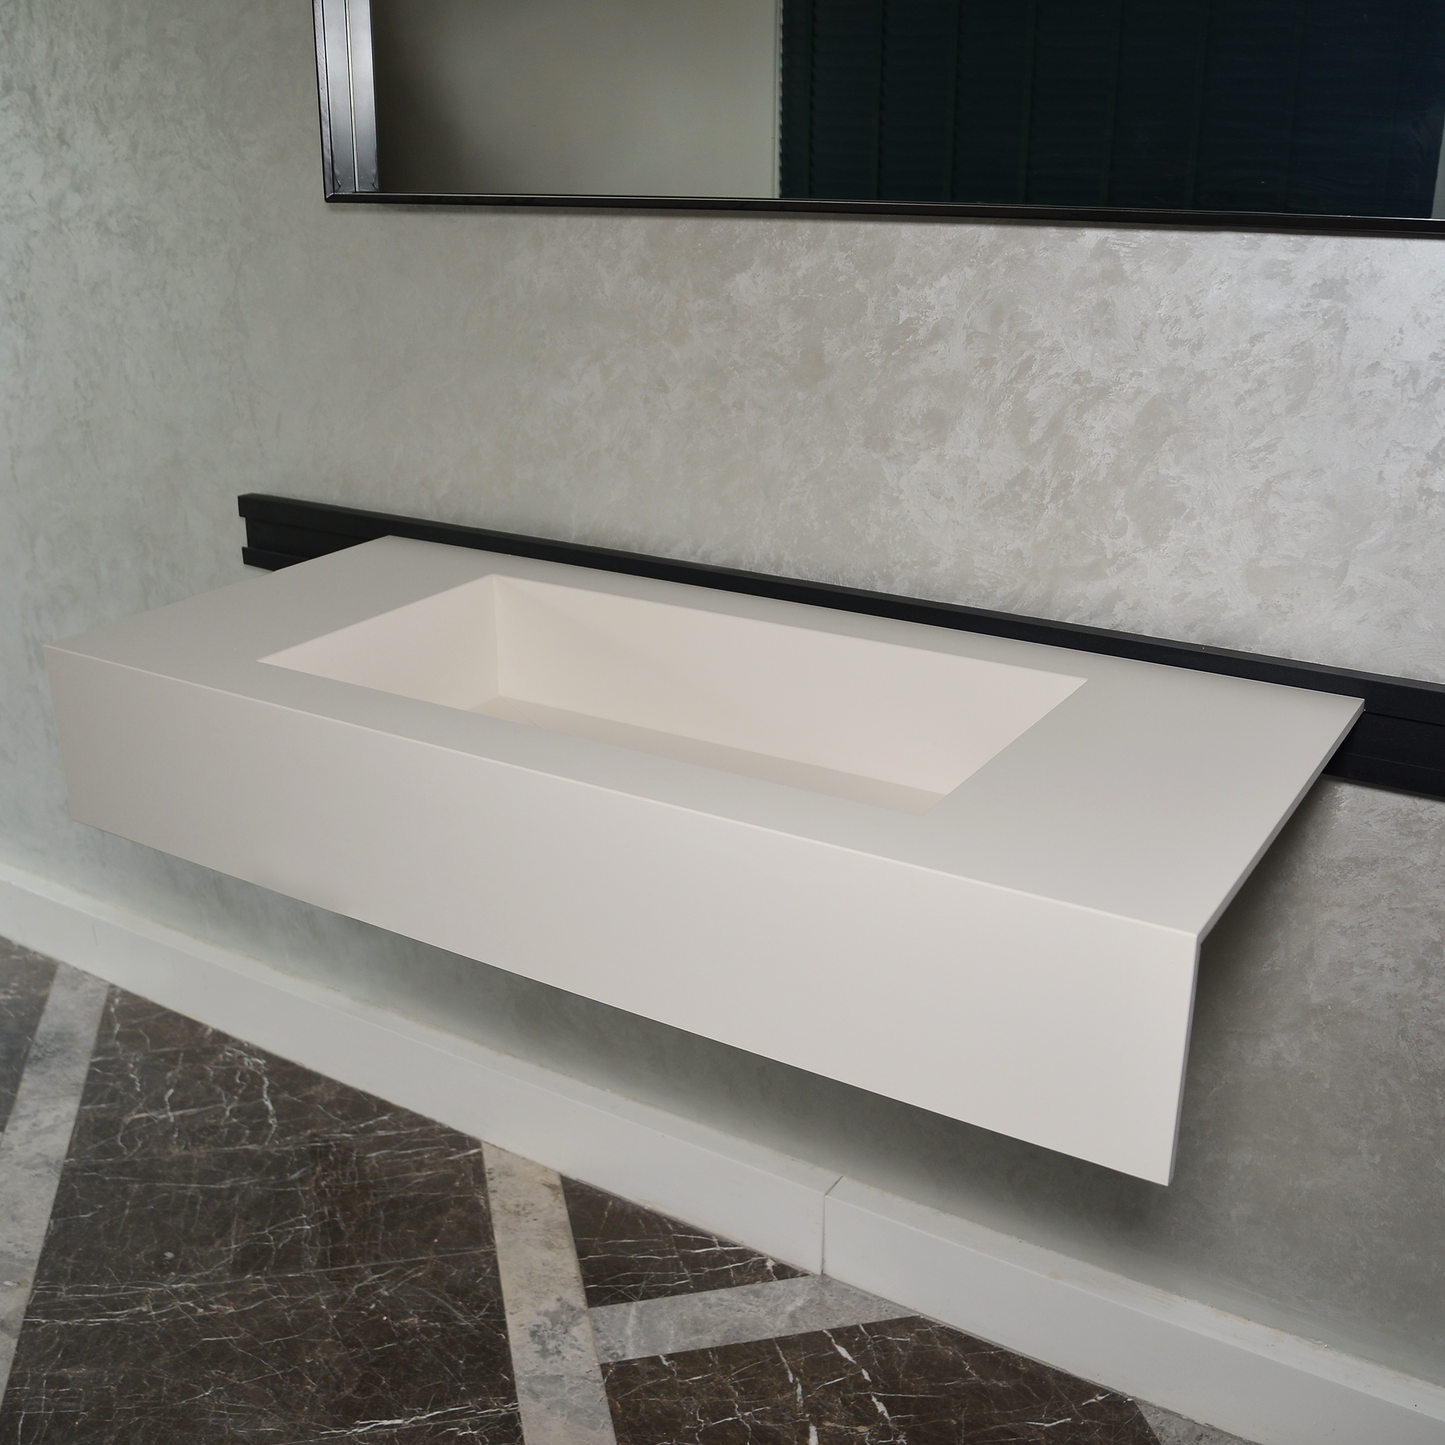 HANDCRAFTED INFINITY ABSOLUTE WHITE ENGINEERED PORCELAIN SINK